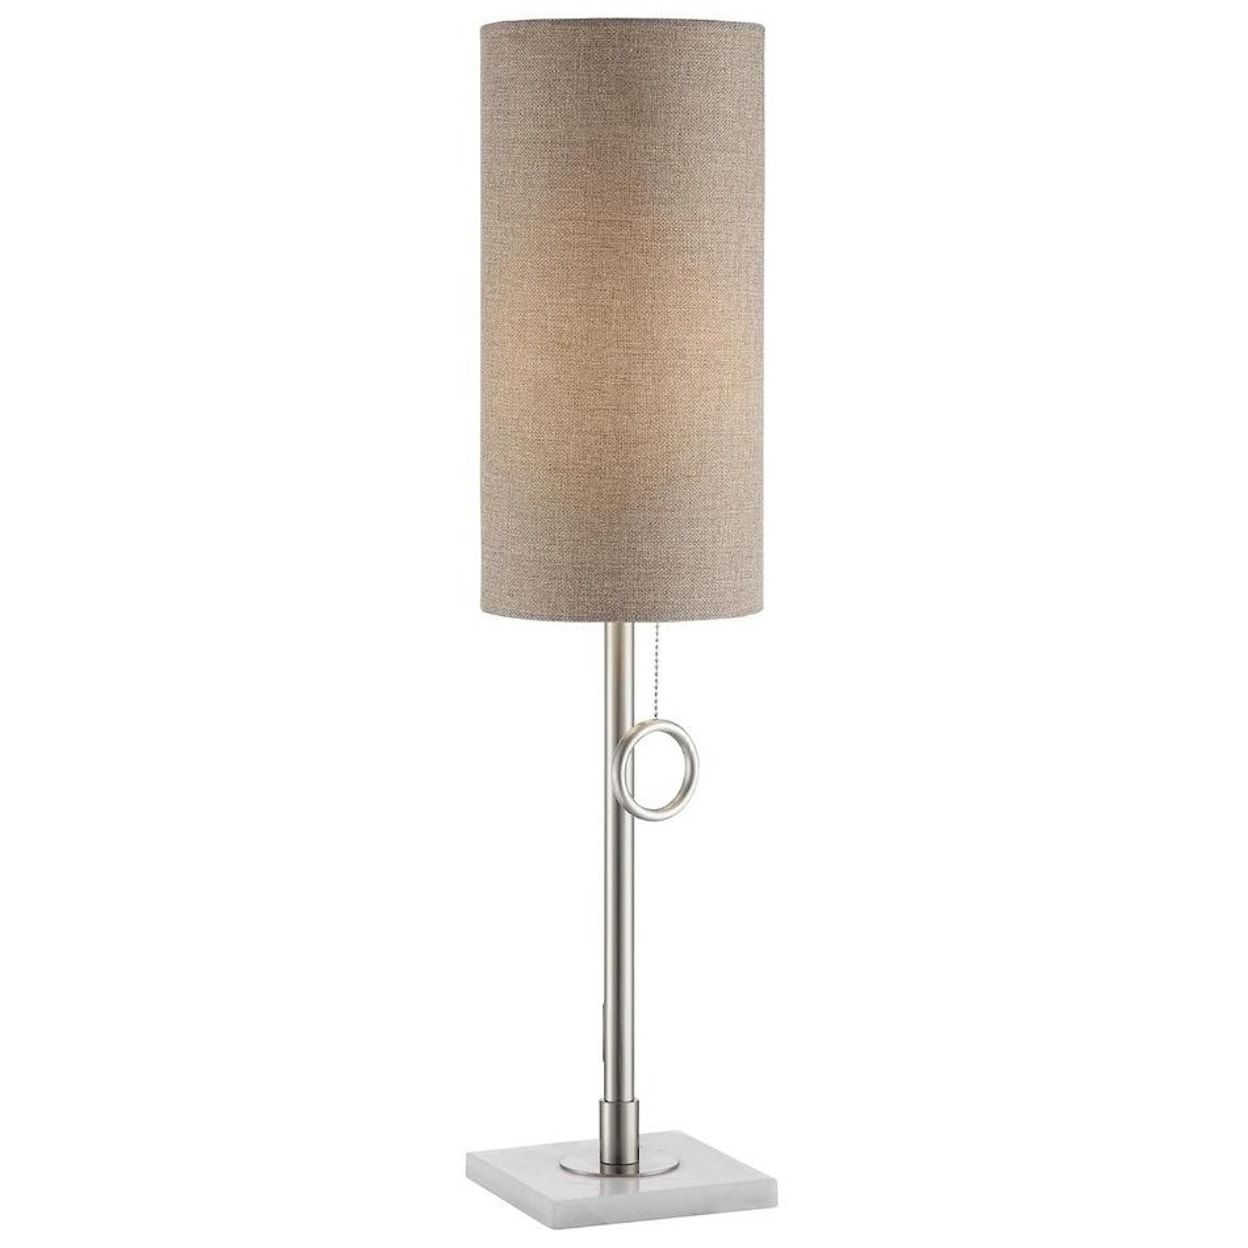 Crestview Collection Lighting Arte Table Lamp